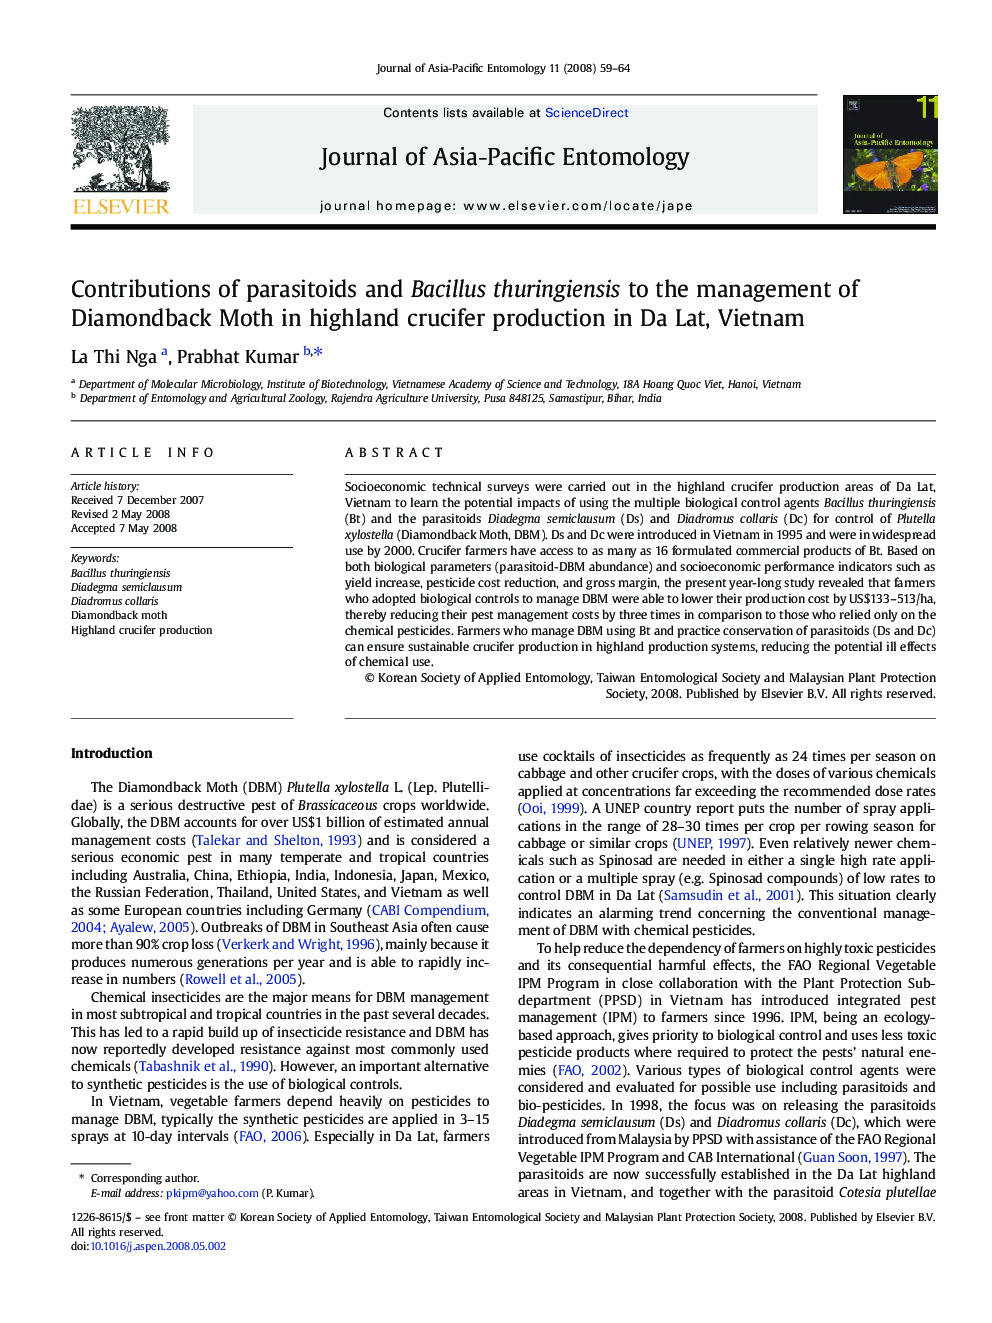 Contributions of parasitoids and Bacillus thuringiensis to the management of Diamondback Moth in highland crucifer production in Da Lat, Vietnam